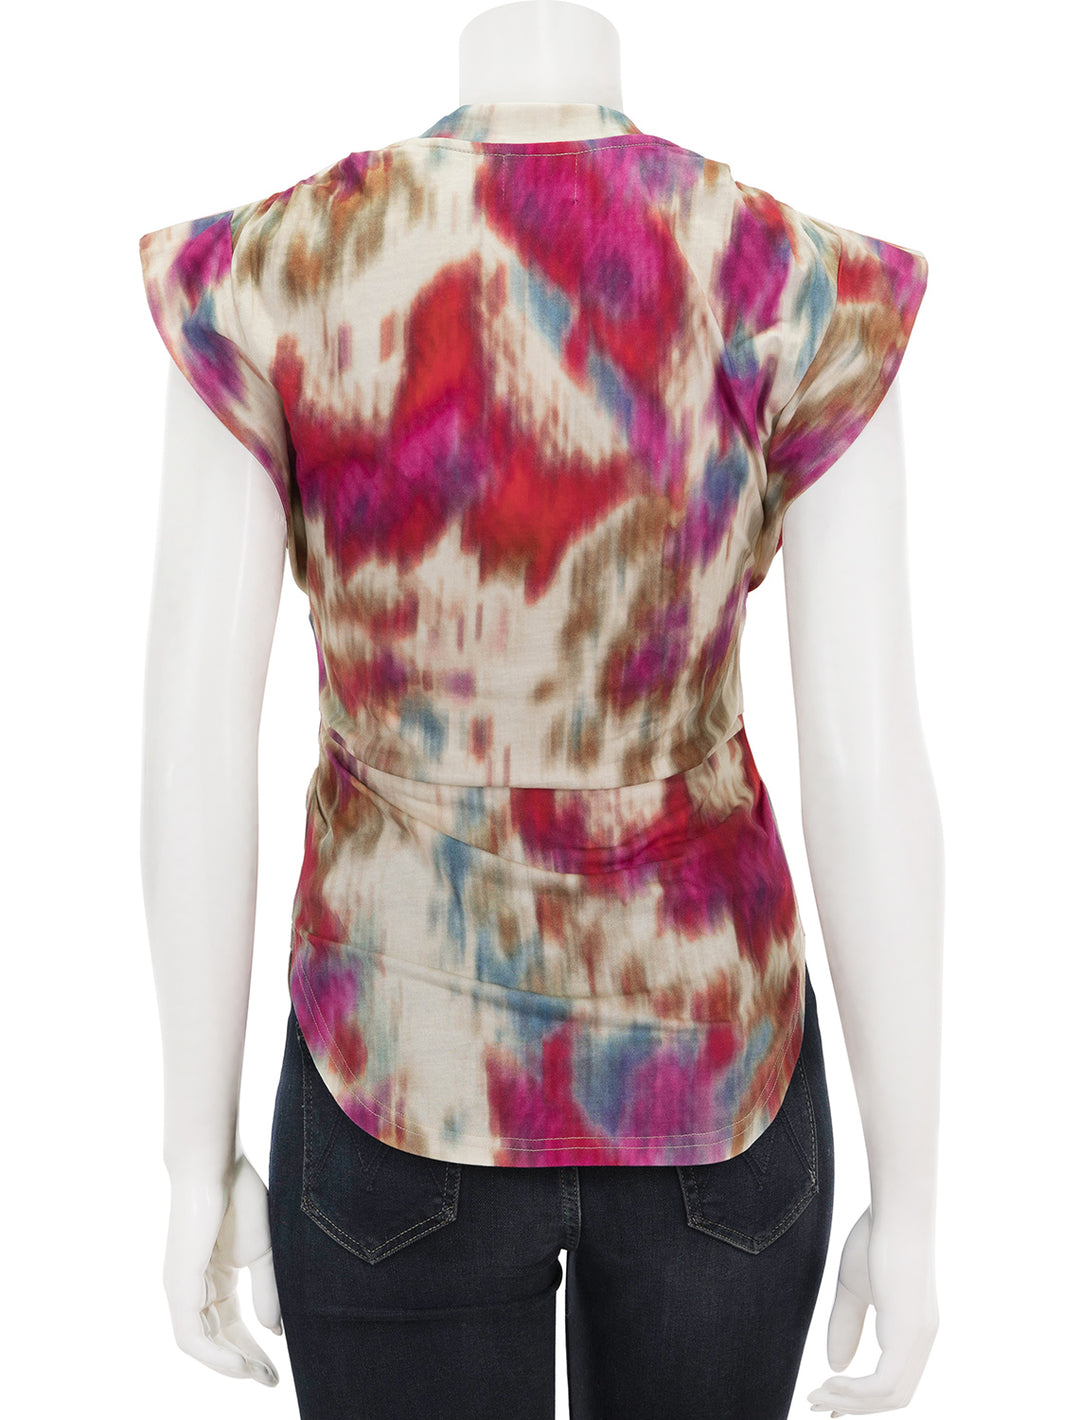 Back view of Isabel Marant Etoile's zilen top in beige and raspberry print.